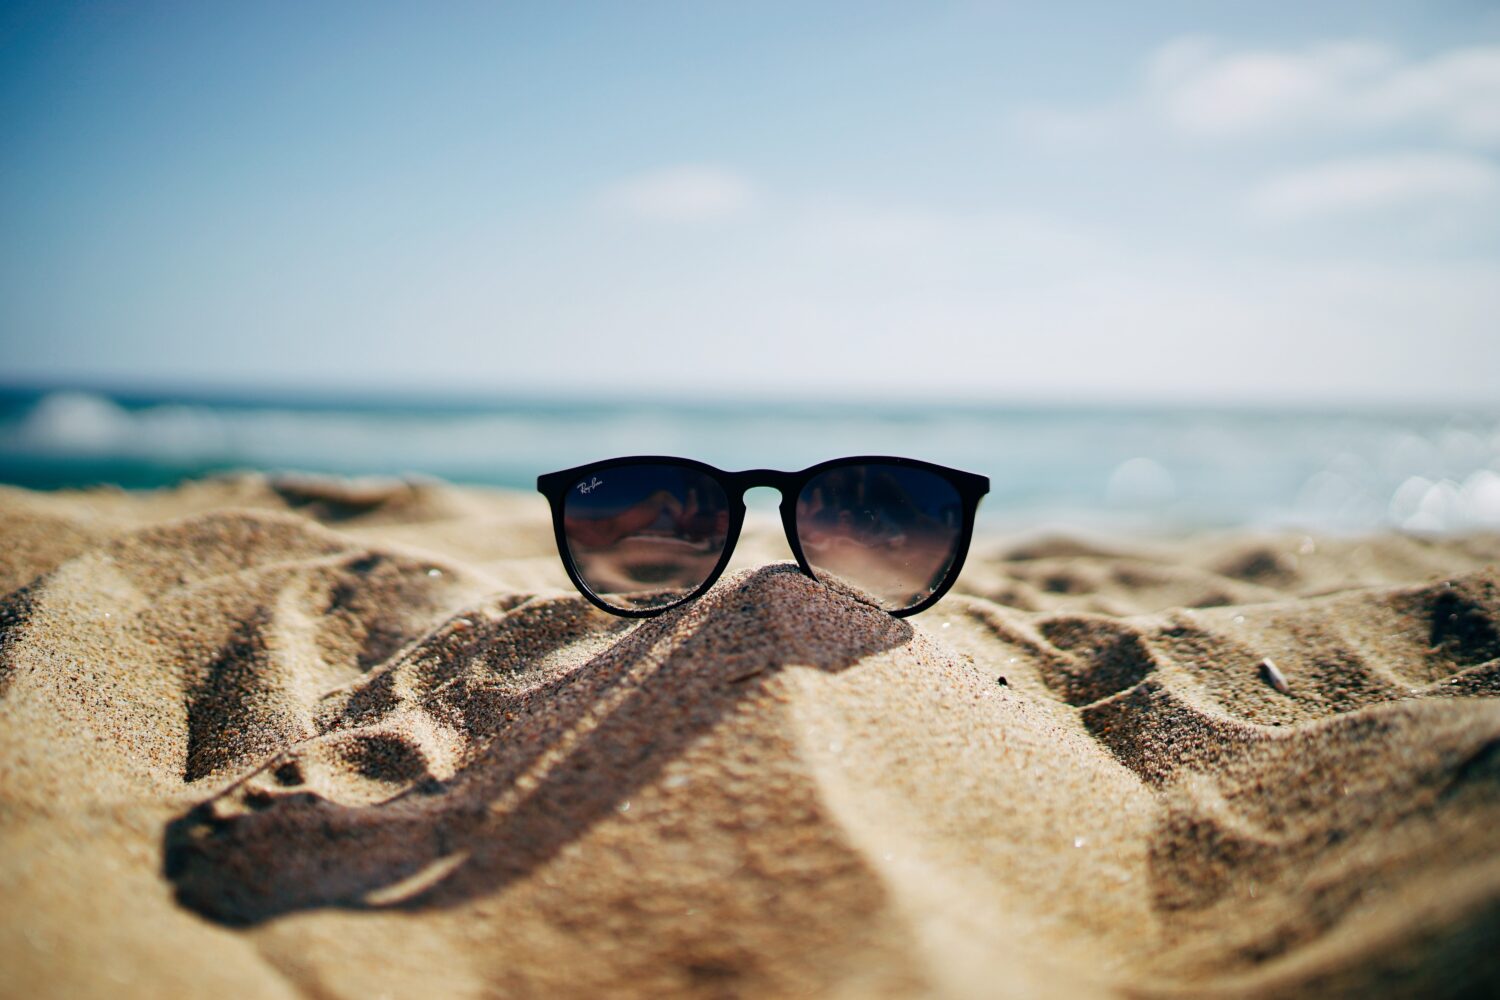 5 Small Business Management Tips for the Busy Summer Season